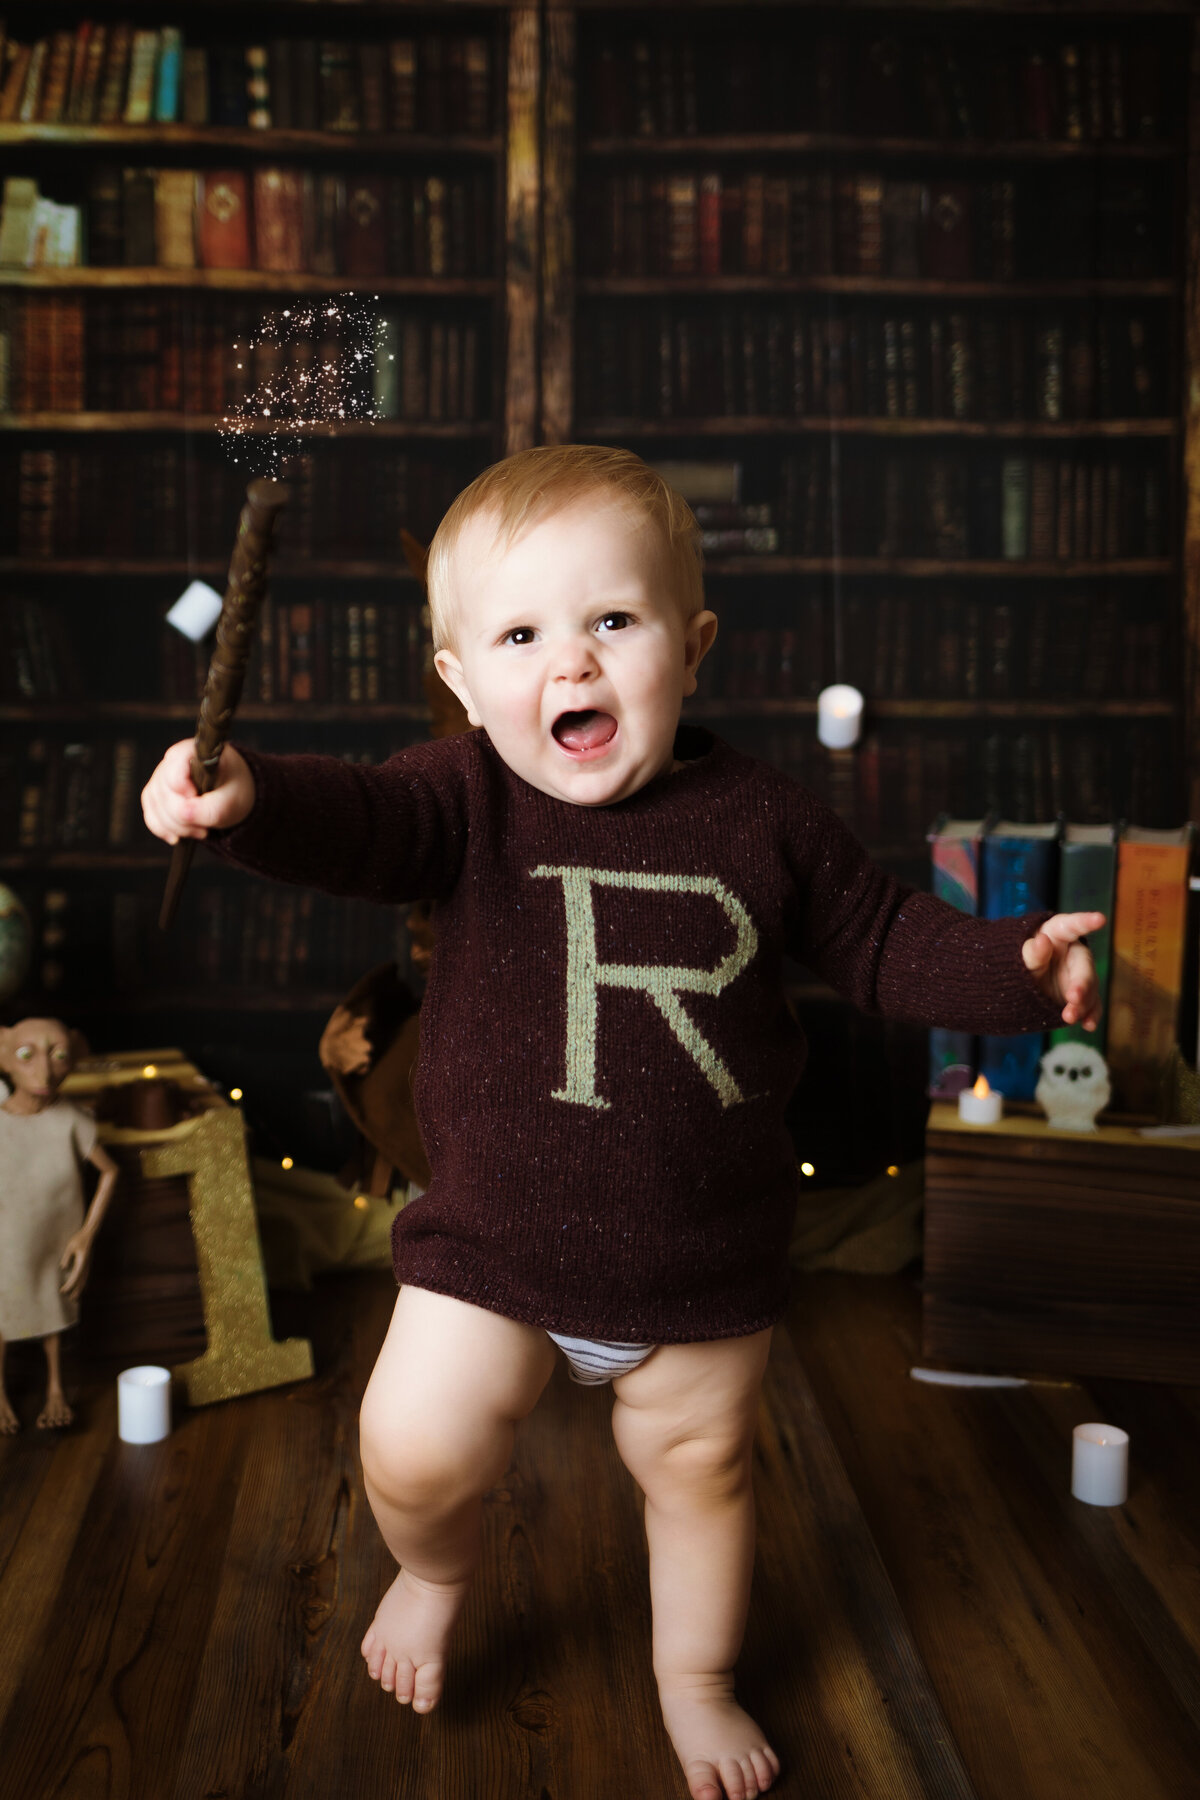 Cake Smash Photographer, a baby wears a sweater with an R resembling ron weasley from Harry Potter Movies, he holds a wand